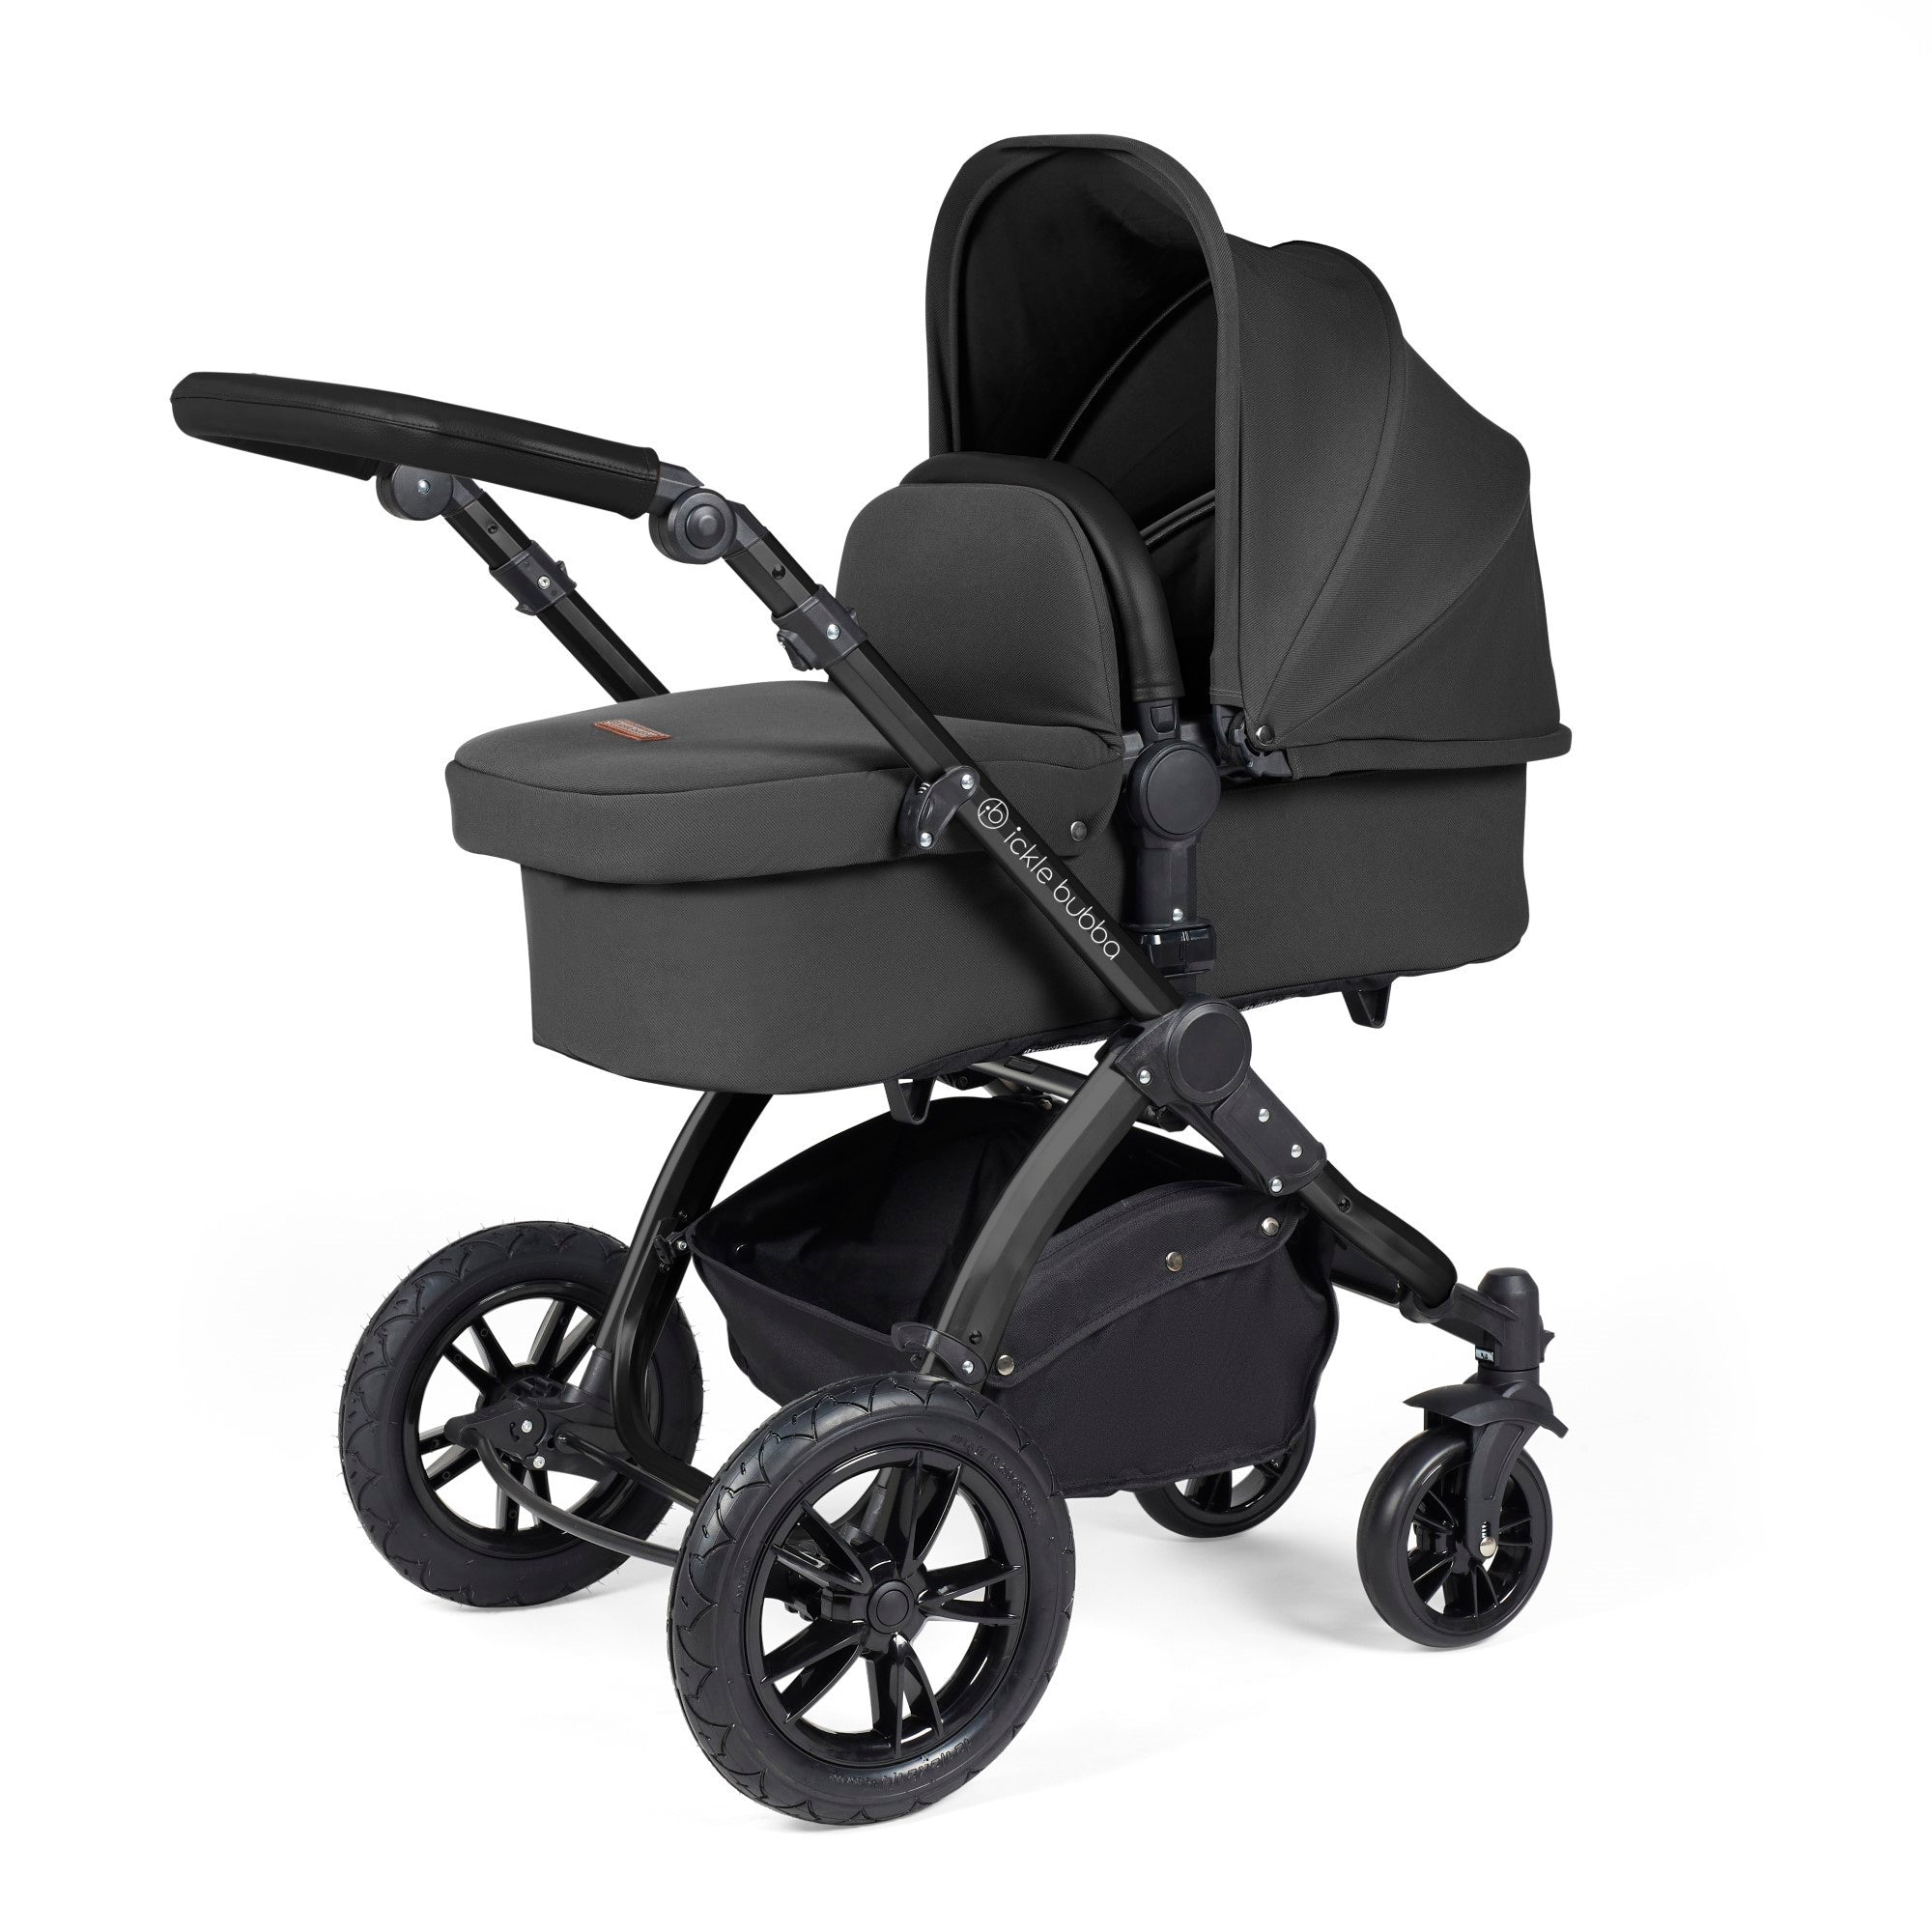 Stomp Luxe - All in one i-Size Travel System - Charcoal Grey with Black Chassis